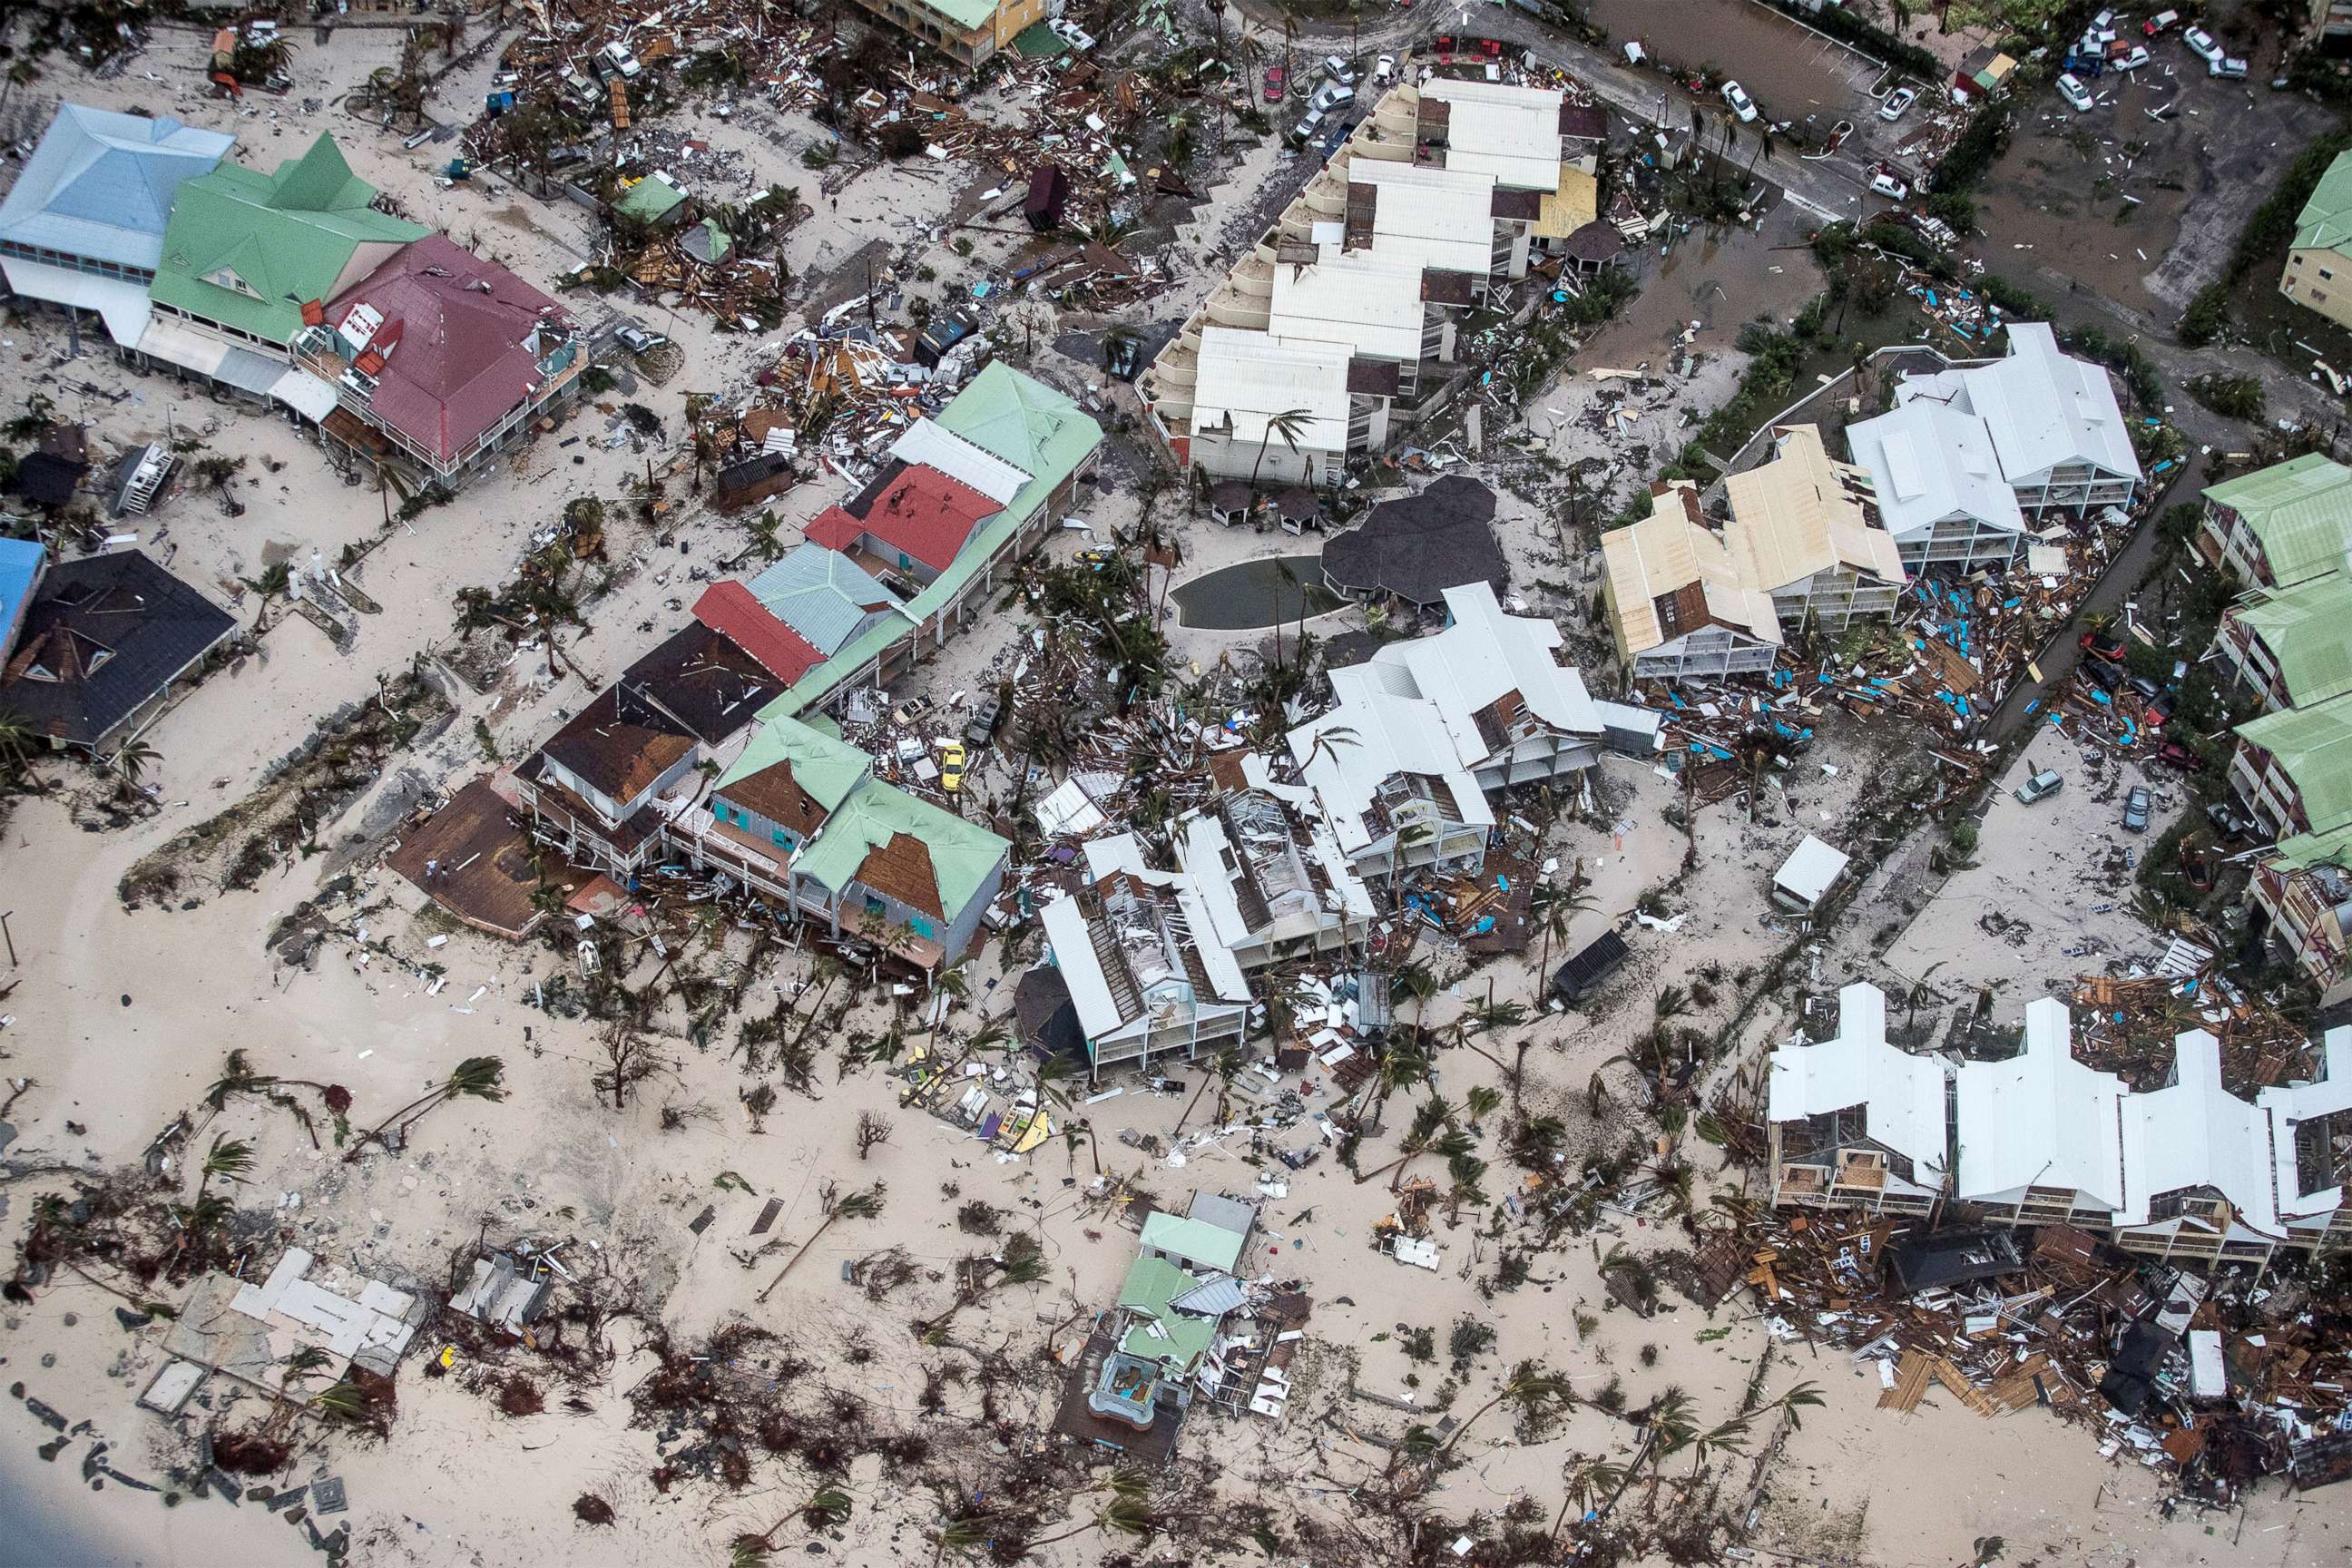 PHOTO: A view of the aftermath of Hurricane Irma on Sint Maarten Dutch part of Saint Martin island in the Caribbean, Sept. 6, 2017.